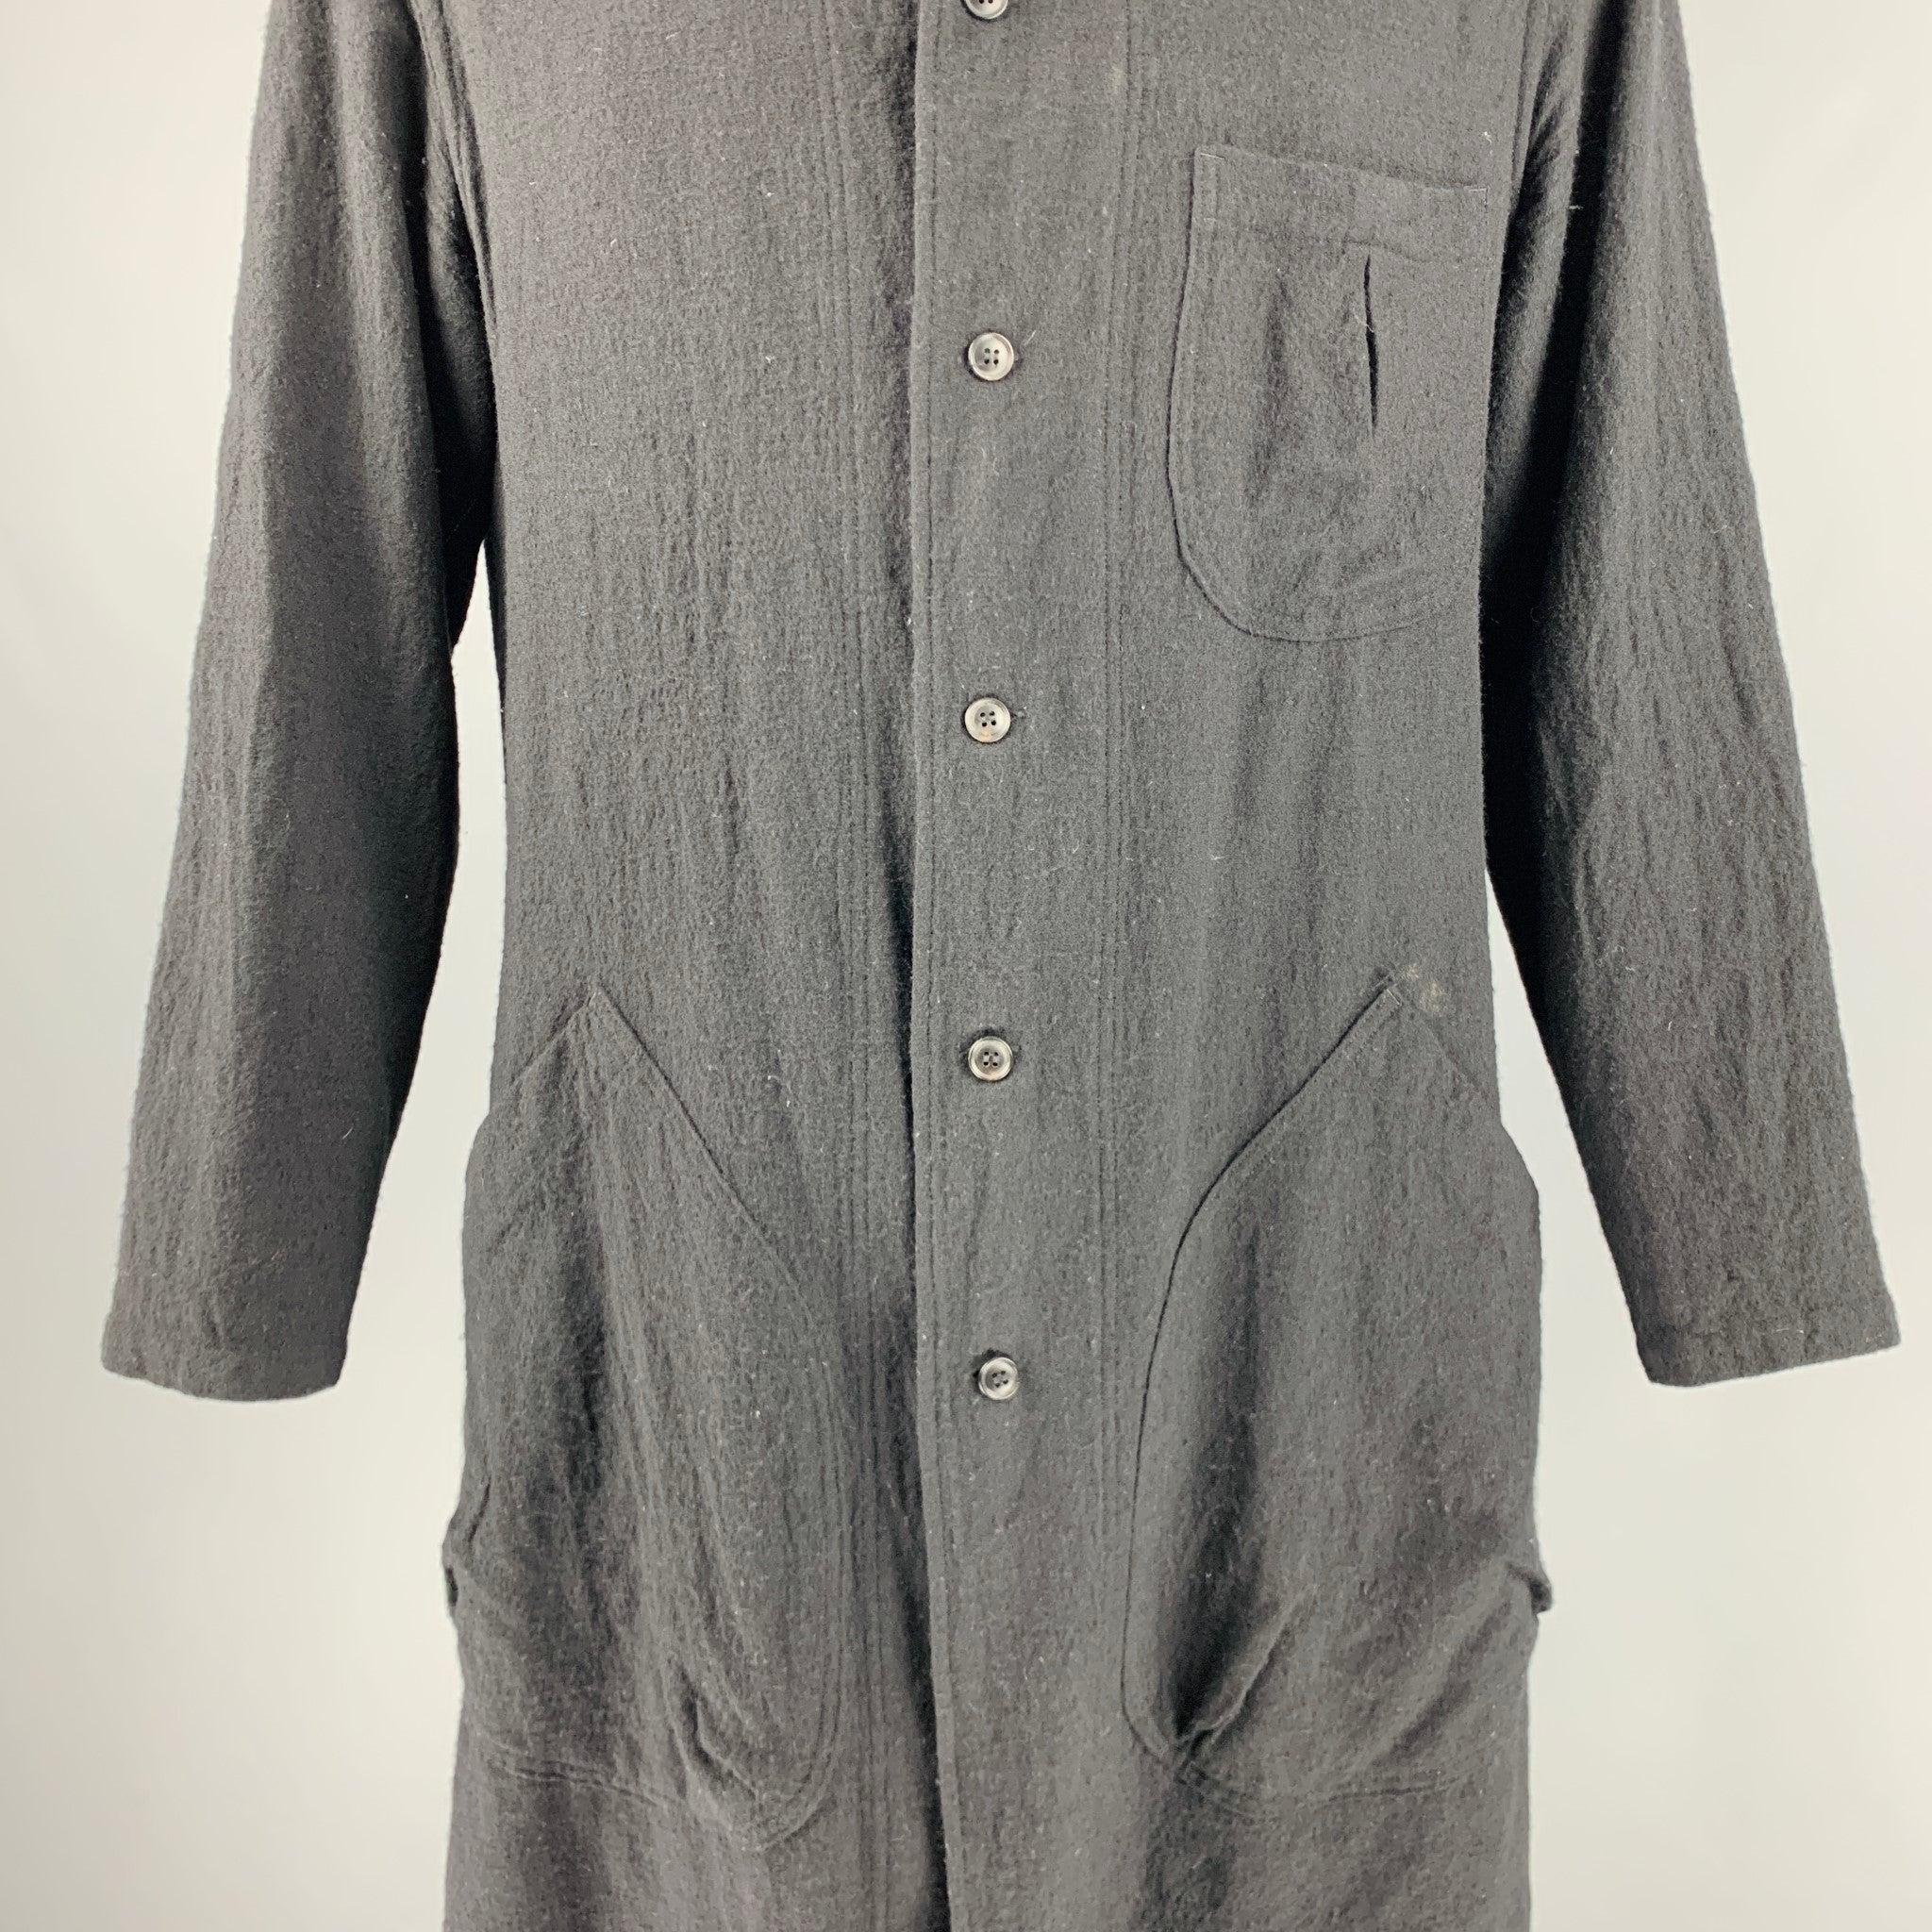 YOHJI YAMAMOTO PRODUCE coat
in a black wool fabric featuring white contrast stitching on collar and sleeves, patch pockets, and a button closure. Made in Japan.Very Good Pre-Owned Condition. Moderate signs of wear. 

Marked:   3 

Measurements: 
